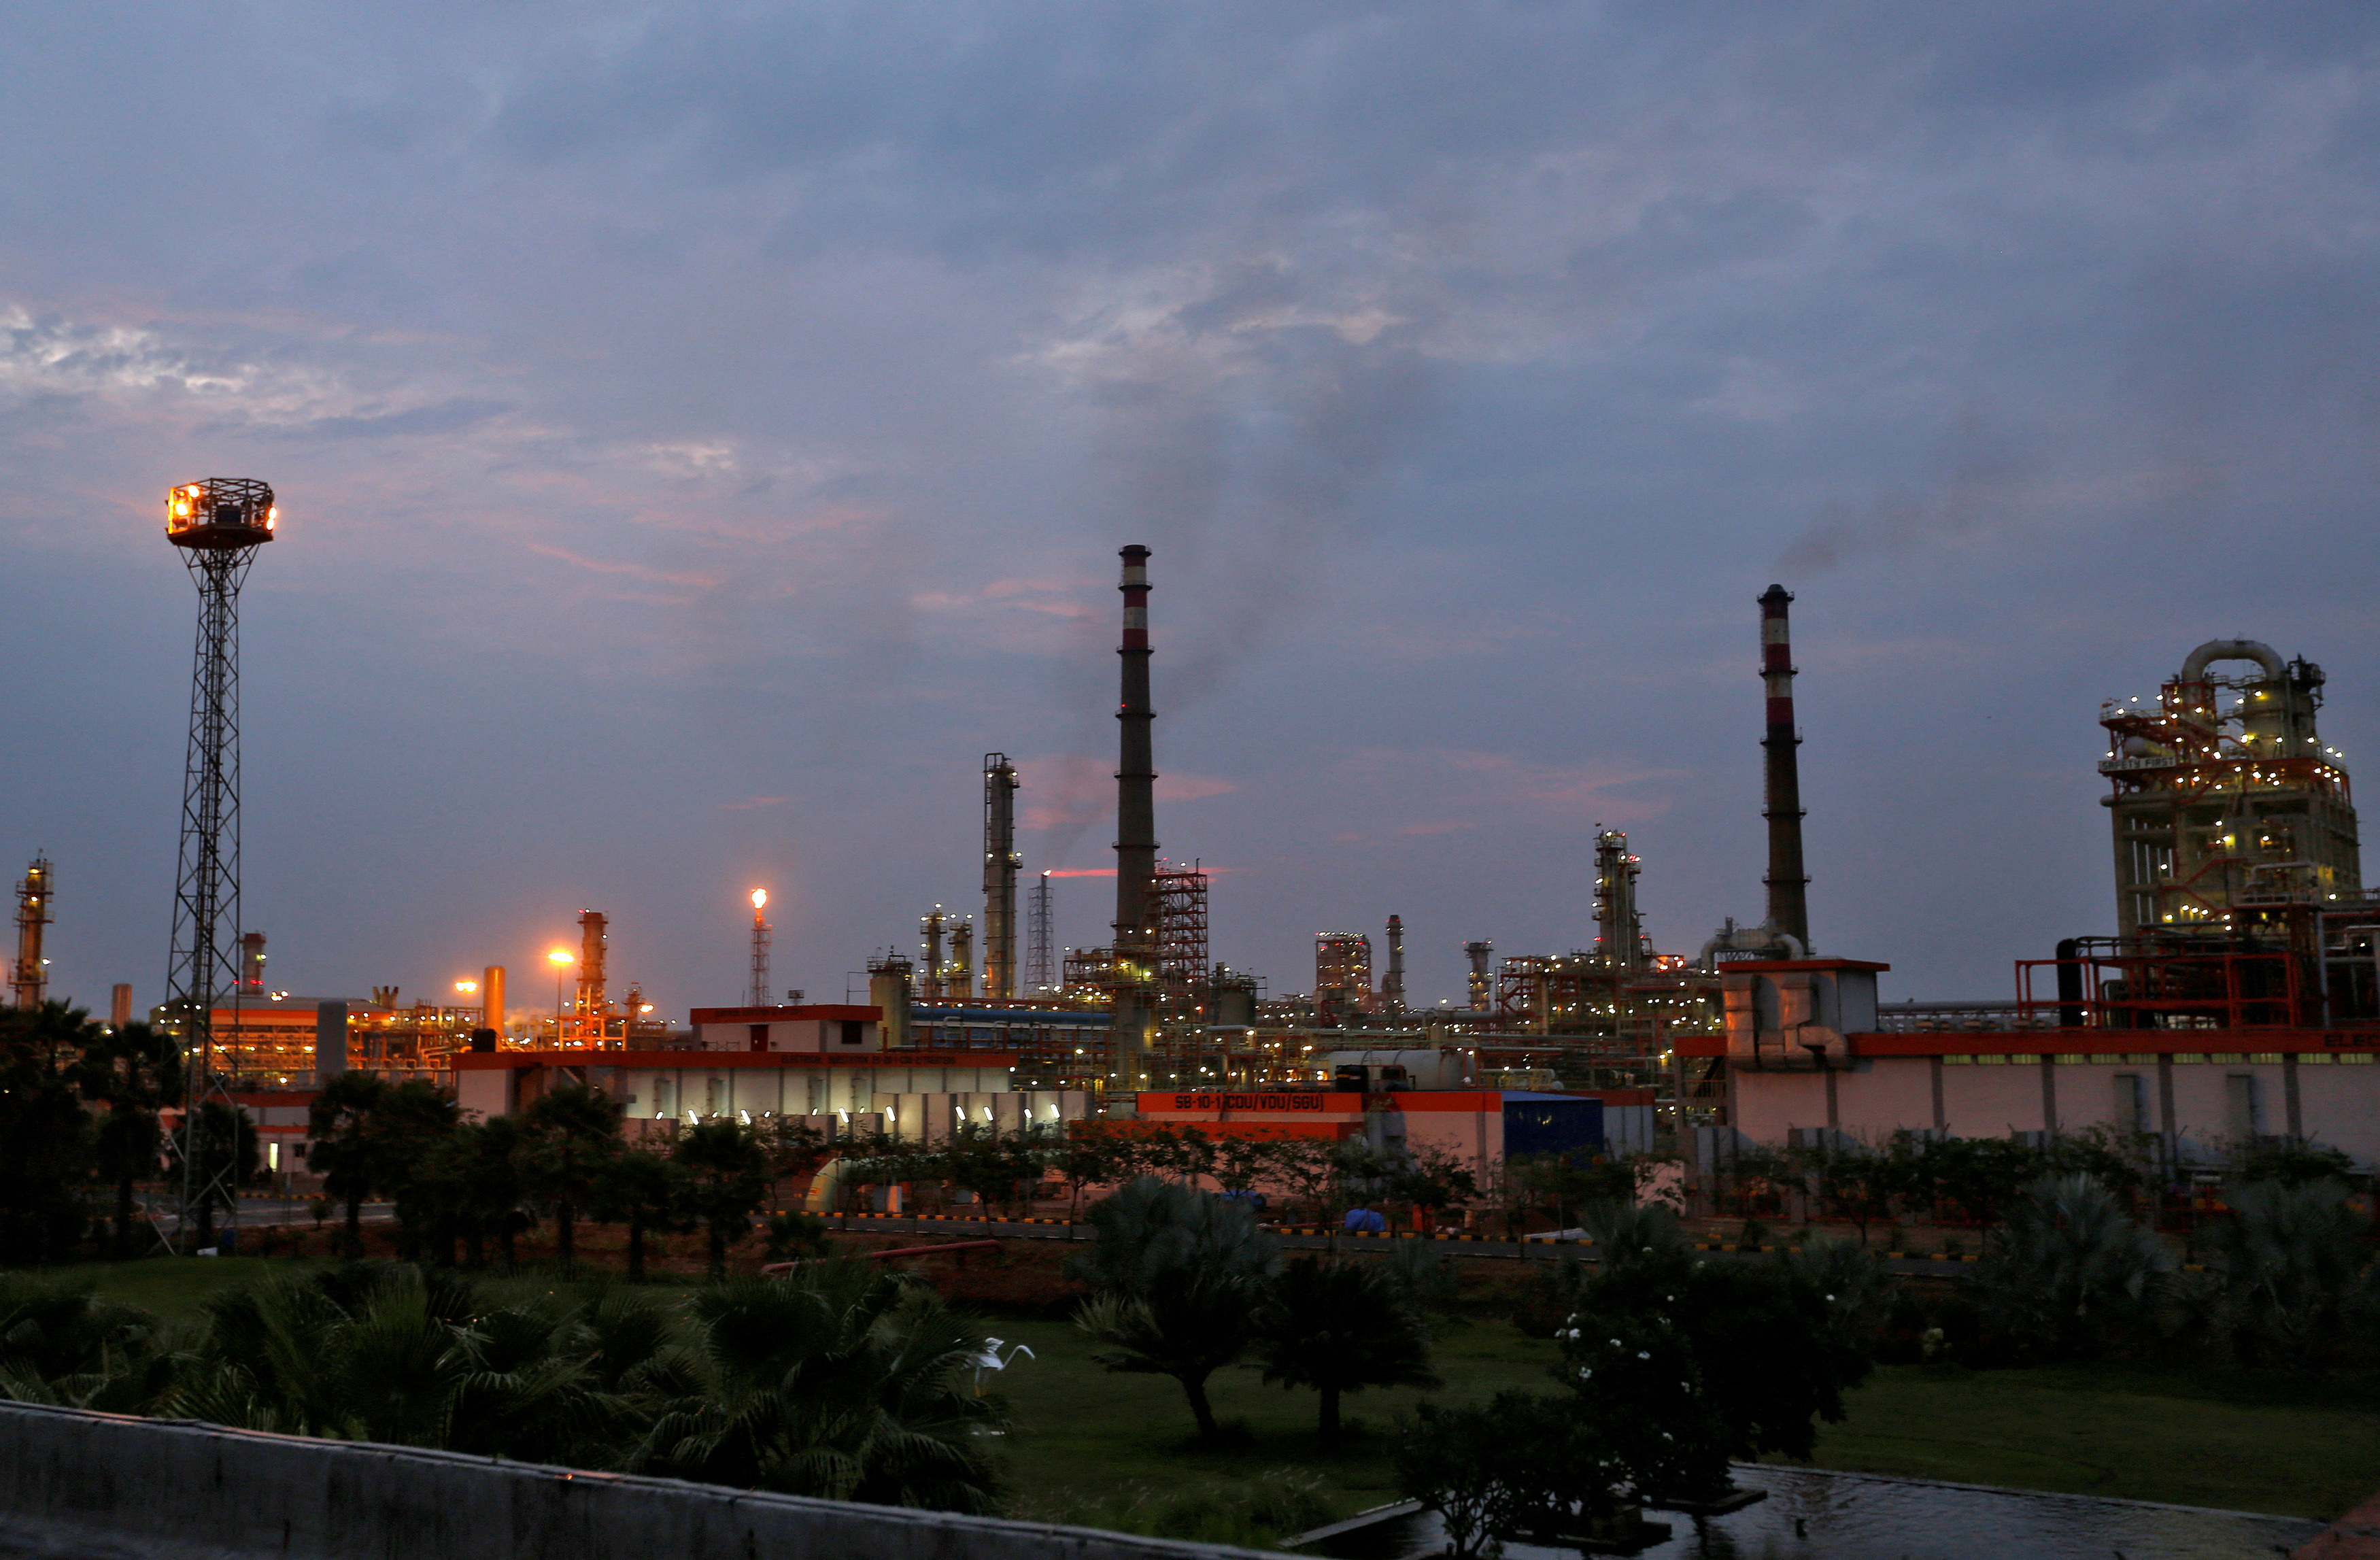 An oil refinery of Essar Oil, which runs India's second biggest private sector refinery, is pictured in Vadinar